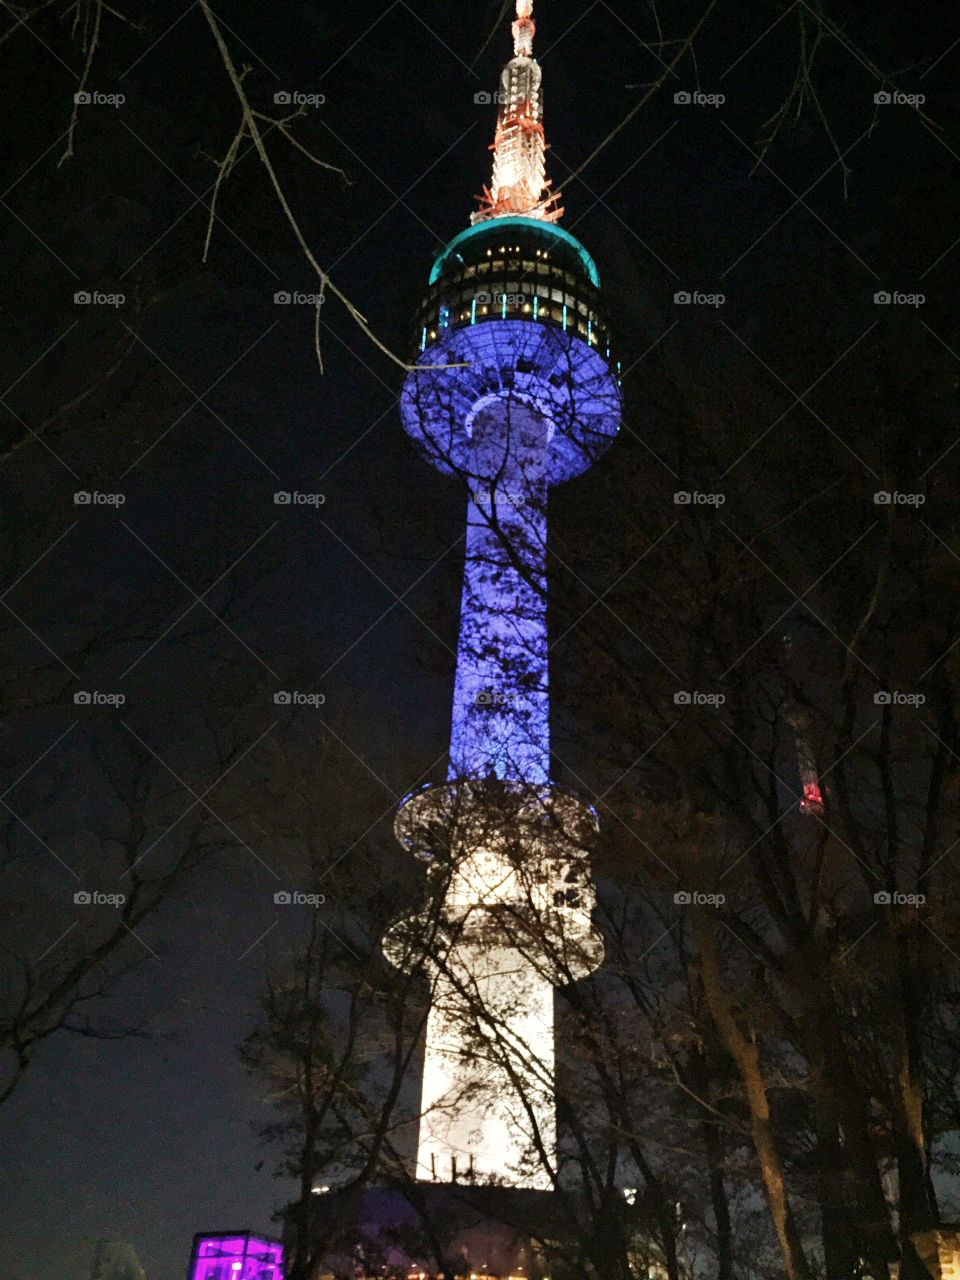 Seoul Tower. Pictures taken late afternoon. visible colored lights illuminate the tower